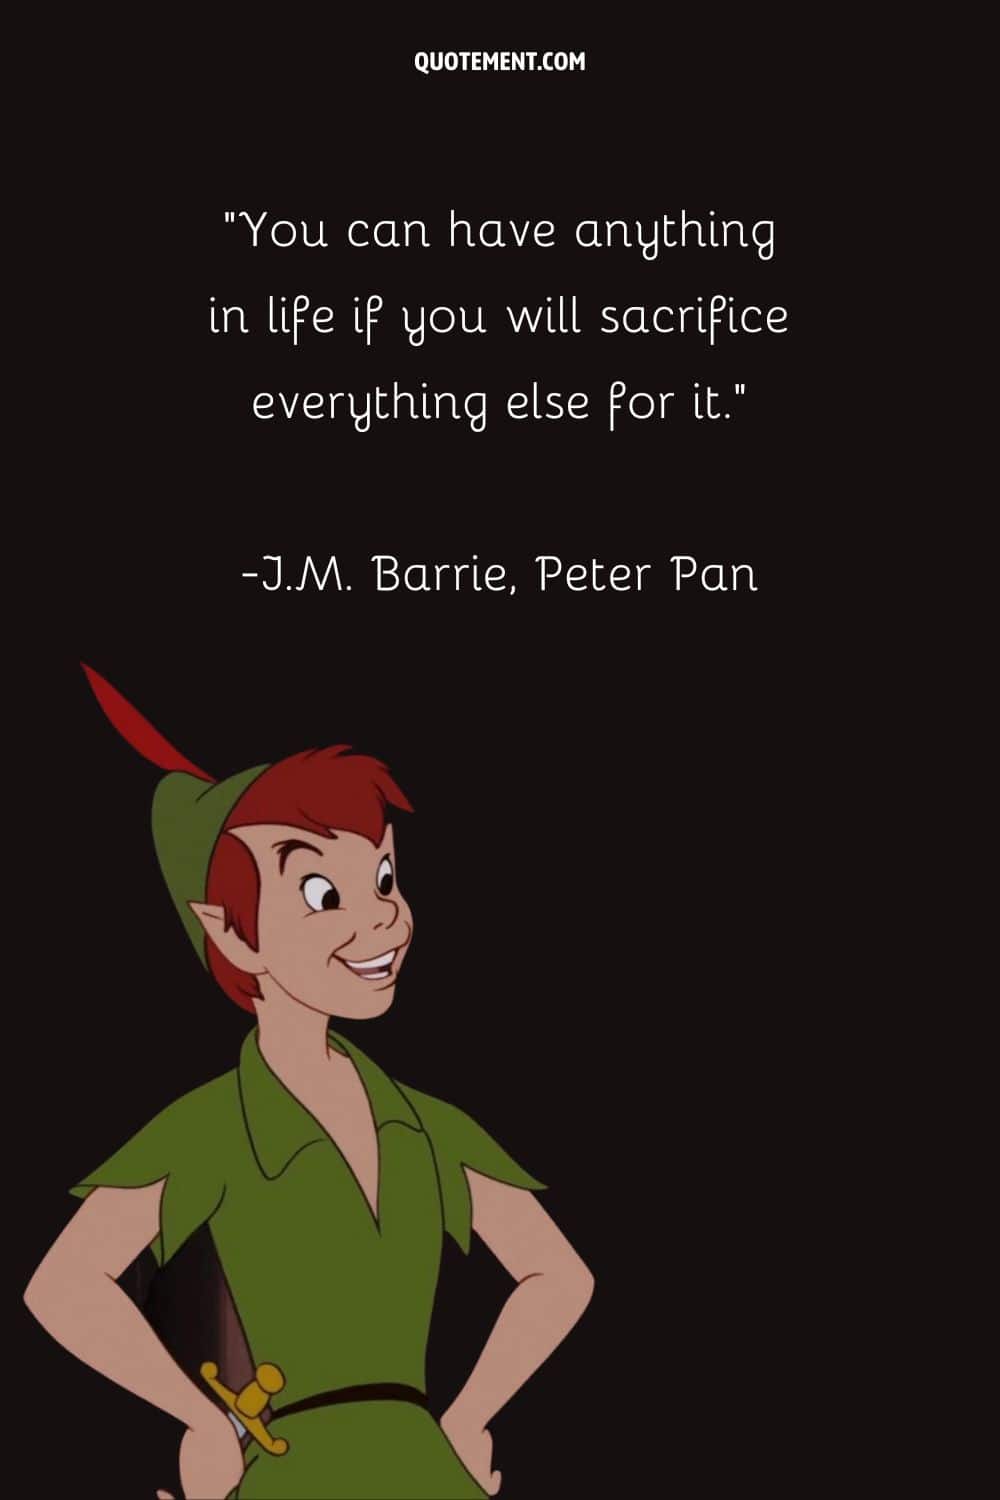 “You can have anything in life if you will sacrifice everything else for it.” ― J.M. Barrie, Peter Pan